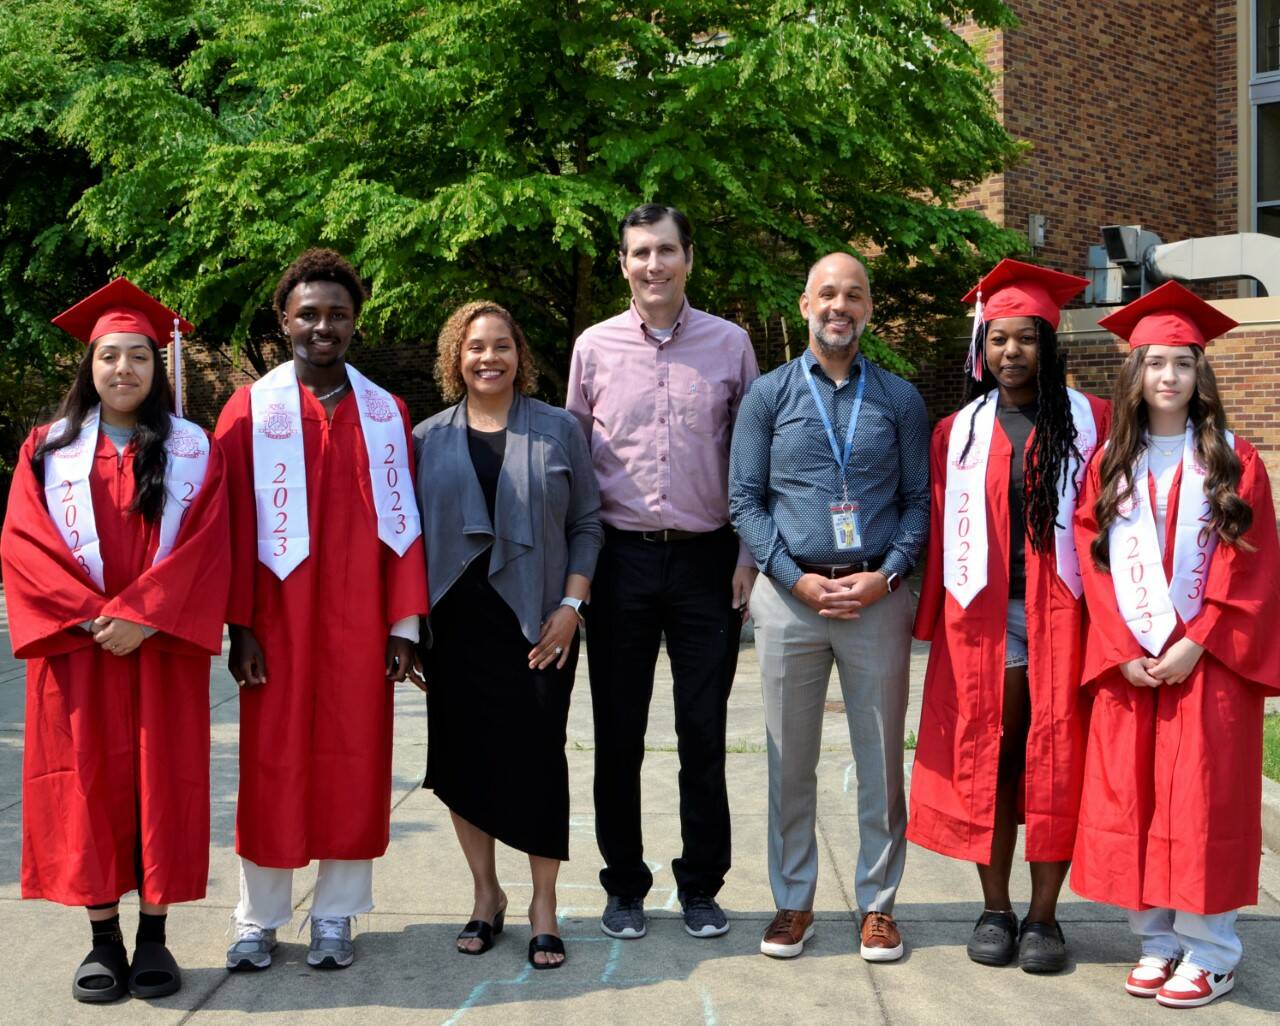 Renton High School graduating seniors Yaxyry Lomeli, Dechae Hester, Jayden Huggins, and Liliana Urias will attend RTC and benefit from Renton Promise. They are pictured with RTC President Yoshiko Harden, Rep. Steve Bergquist, RSD Superintendent Damian Pattenaude. (Courtesy photo)